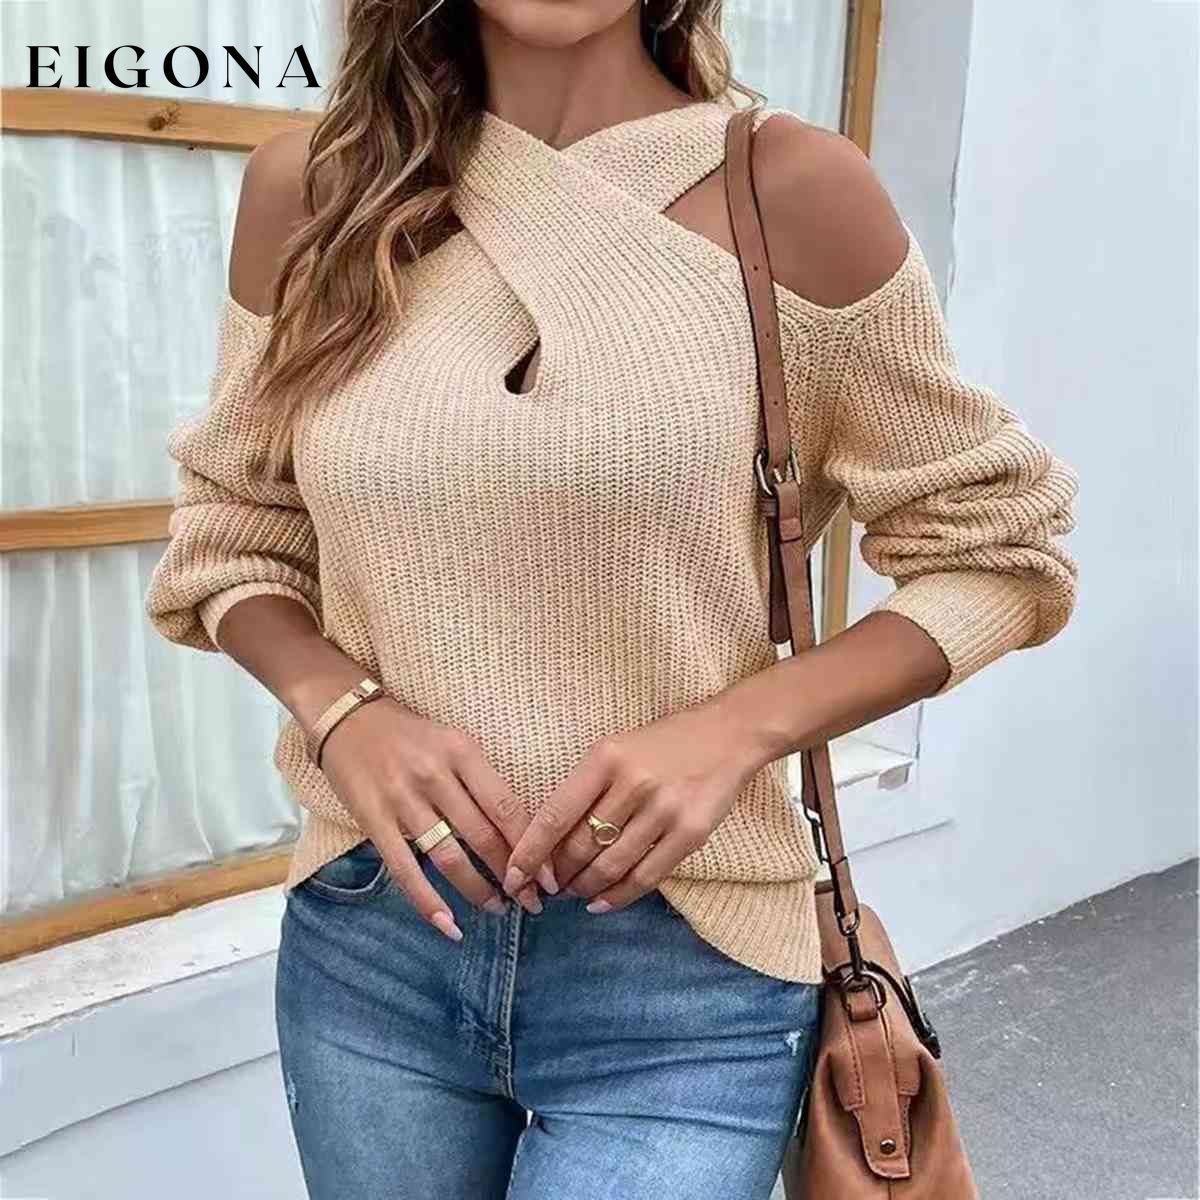 Crisscross Cold-Shoulder Sexy Sweater Cream clothes long sleeve shirts long sleeve top Ship From Overseas Shipping Delay 10/01/2023 - 10/02/2023 shirt shirts sweater sweaters top tops Y*X